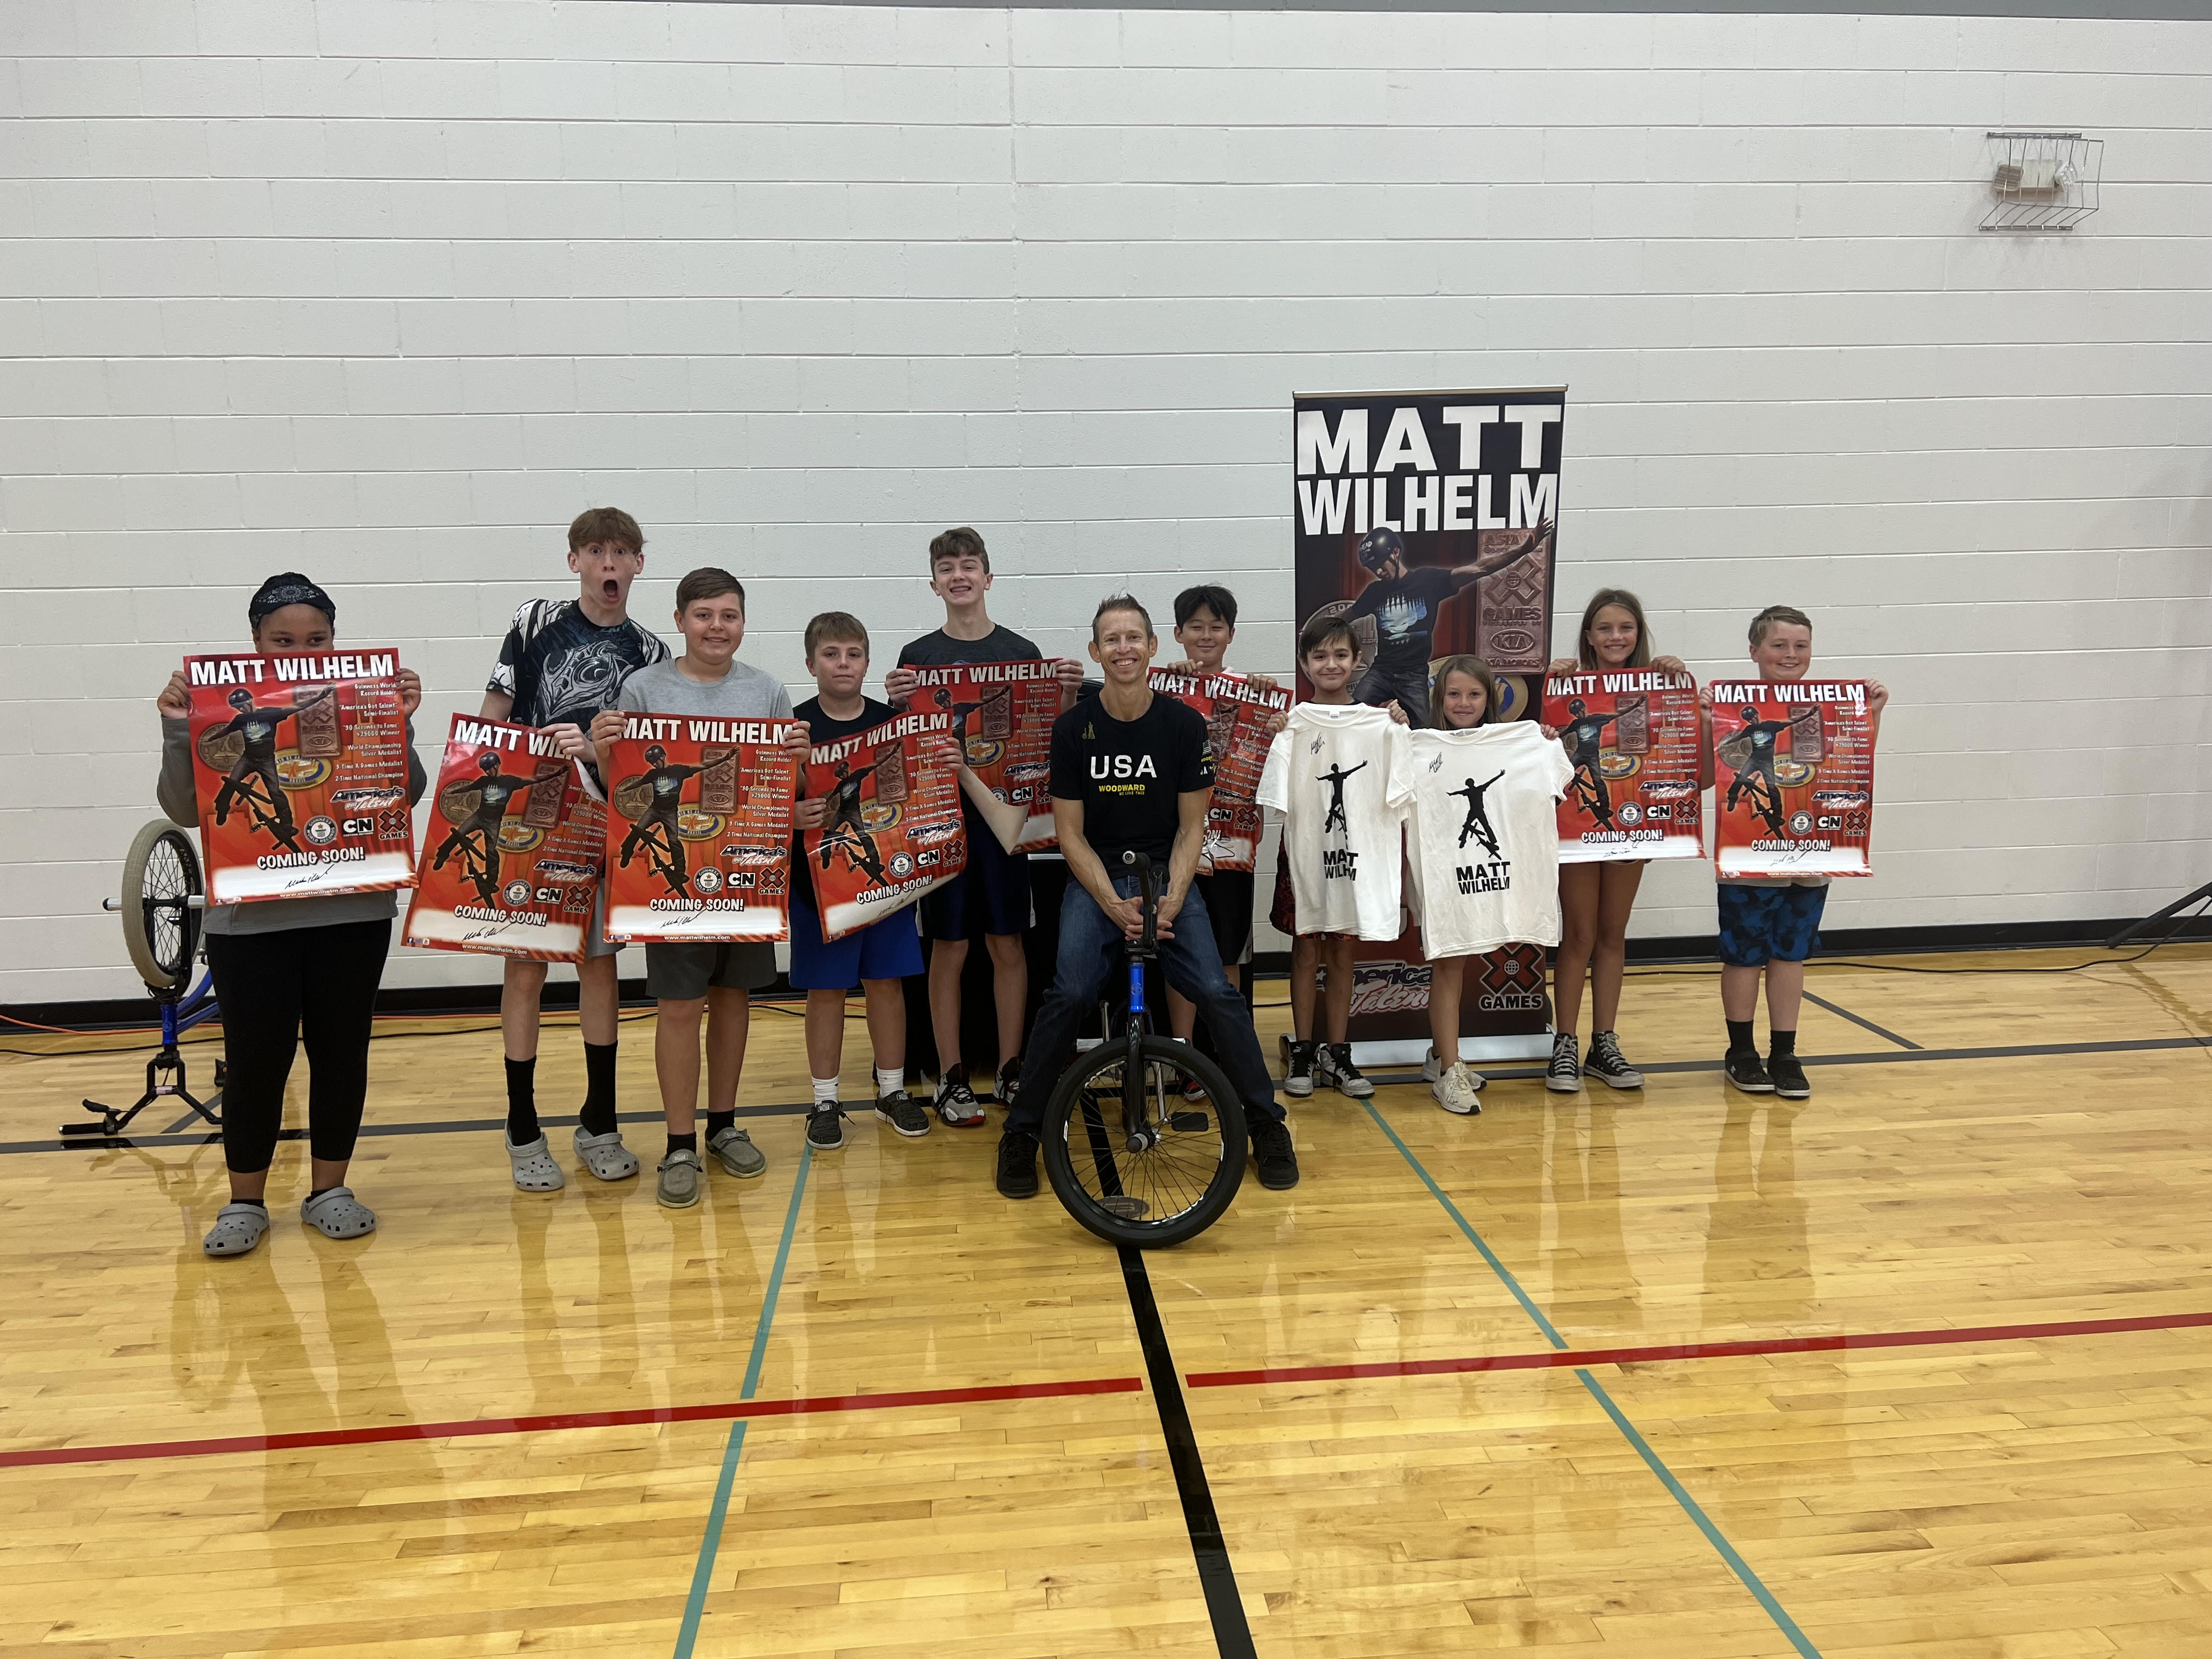 Students with Matt Wilhelm getting autographs after the assembly.